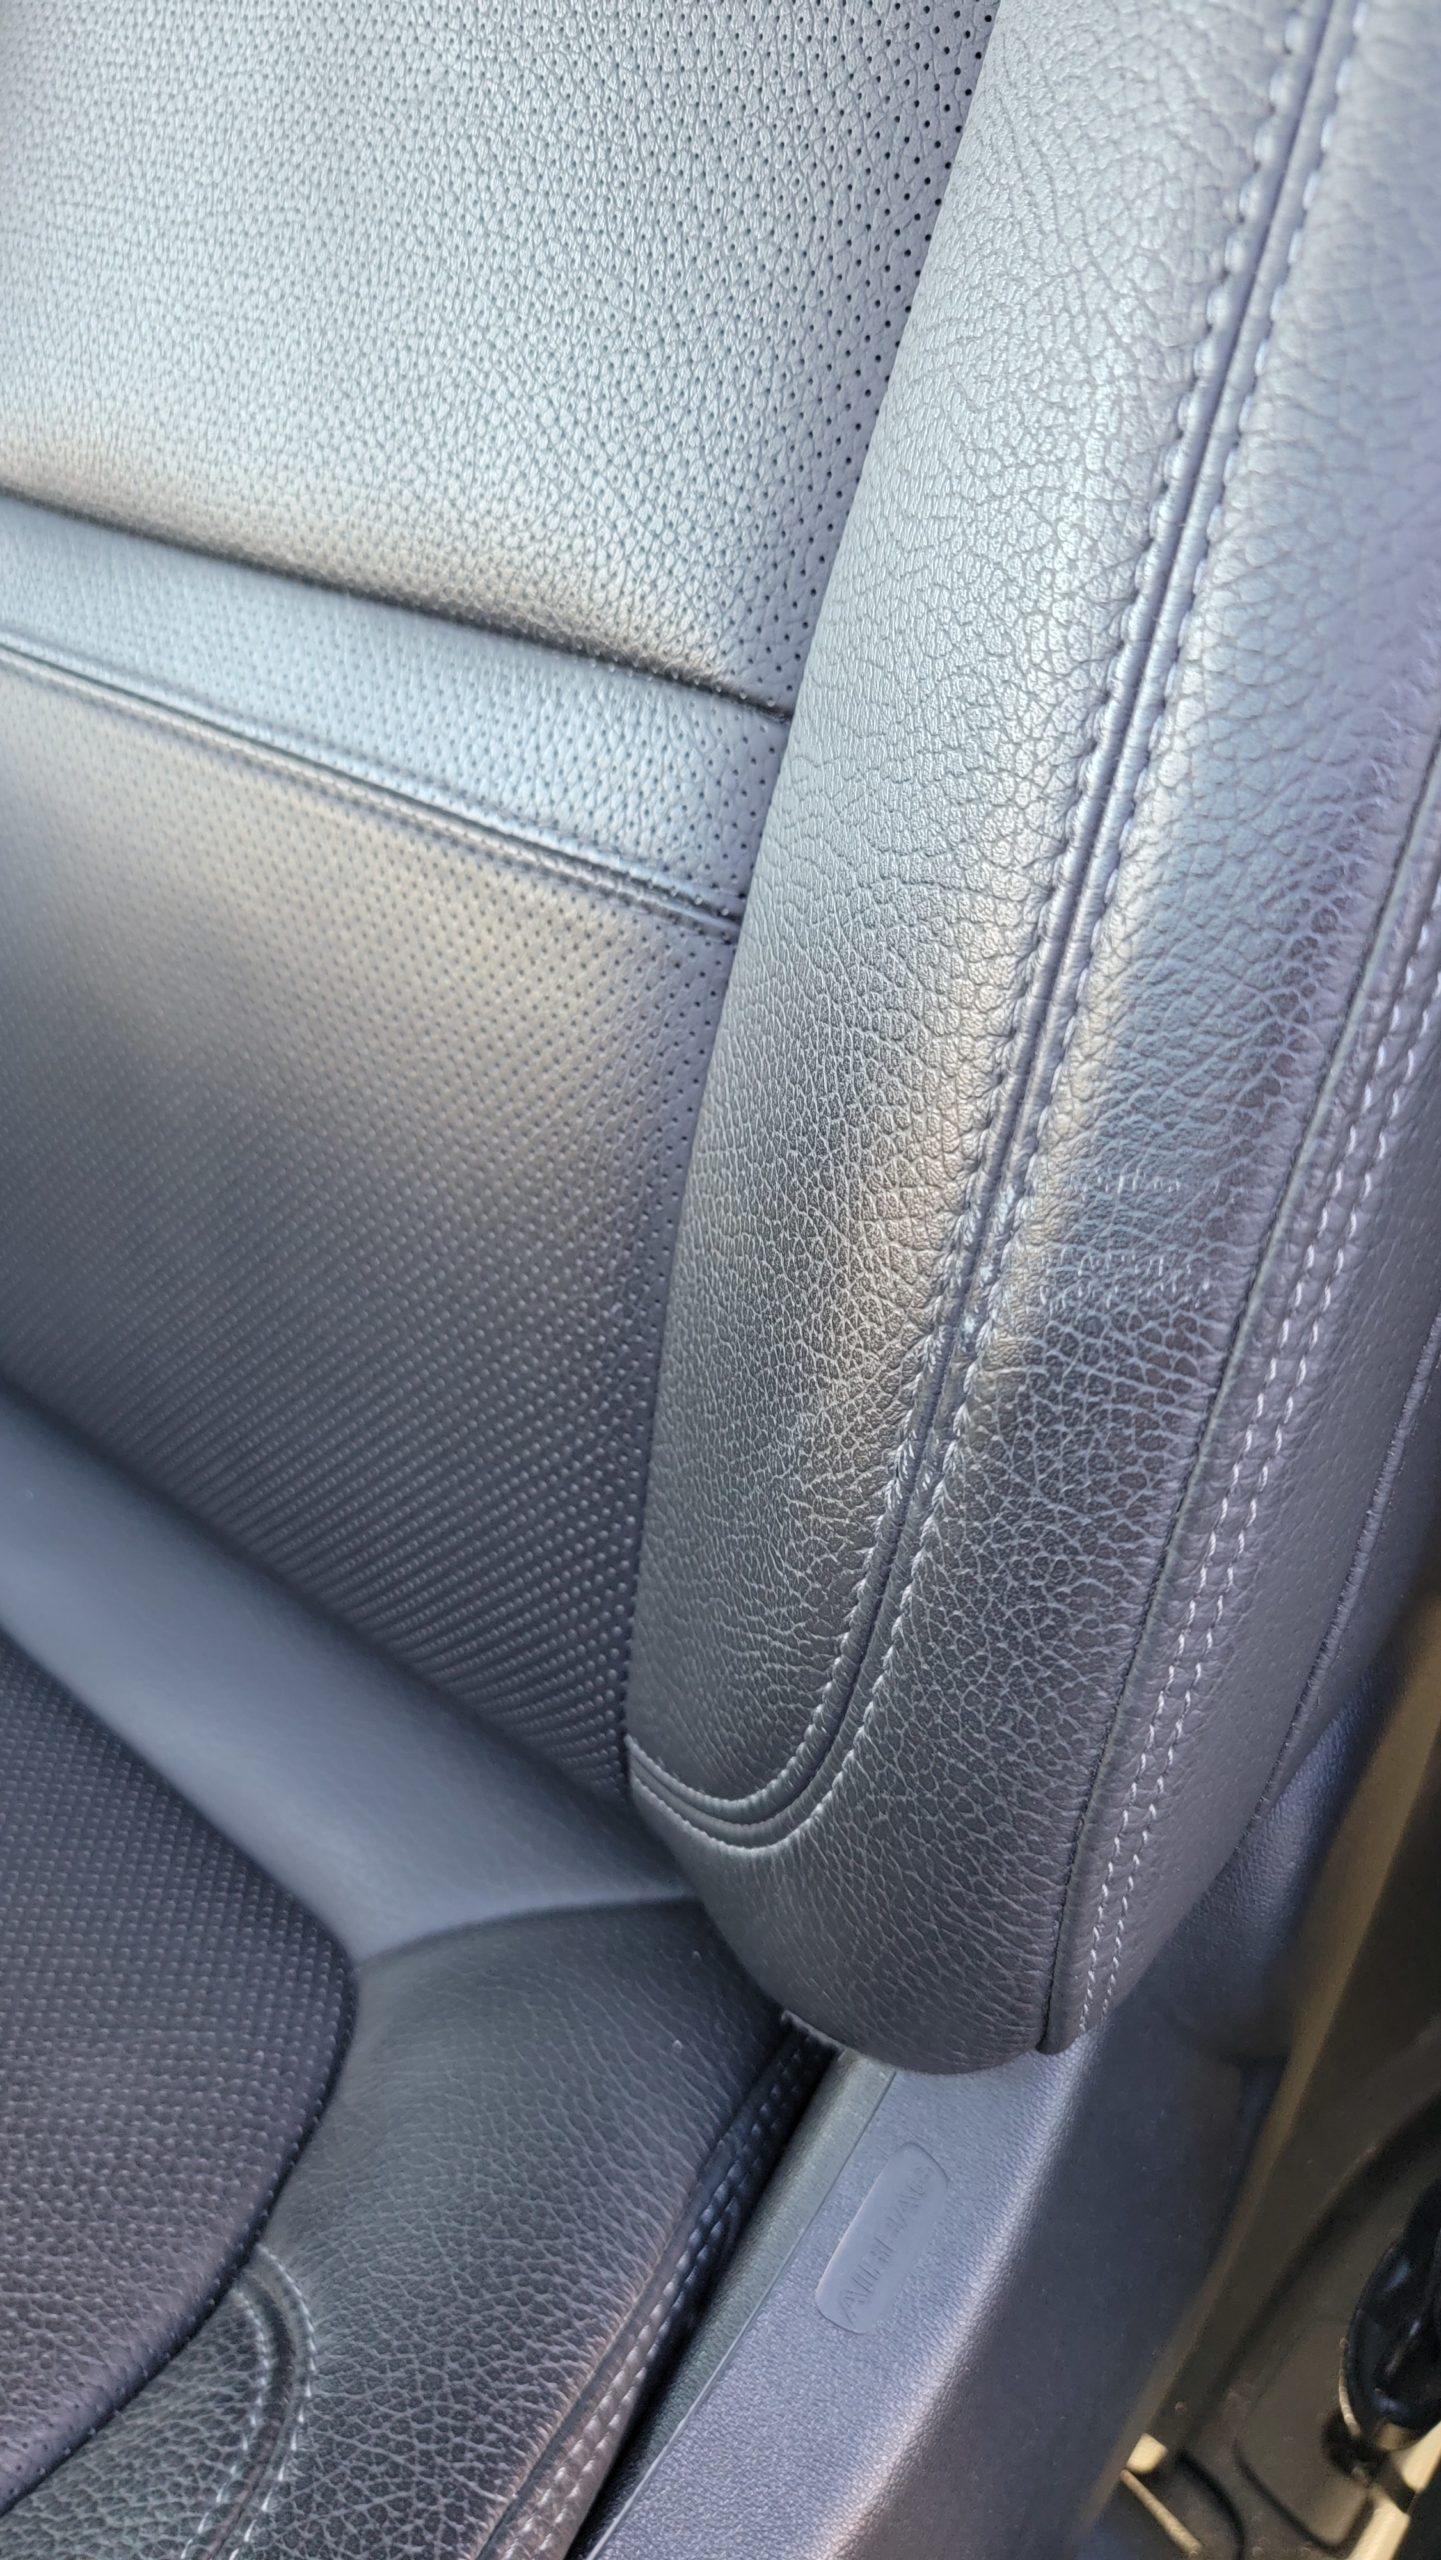 DIY Car Upholstery Cleaner Recipes for Cloth & Leather Seats